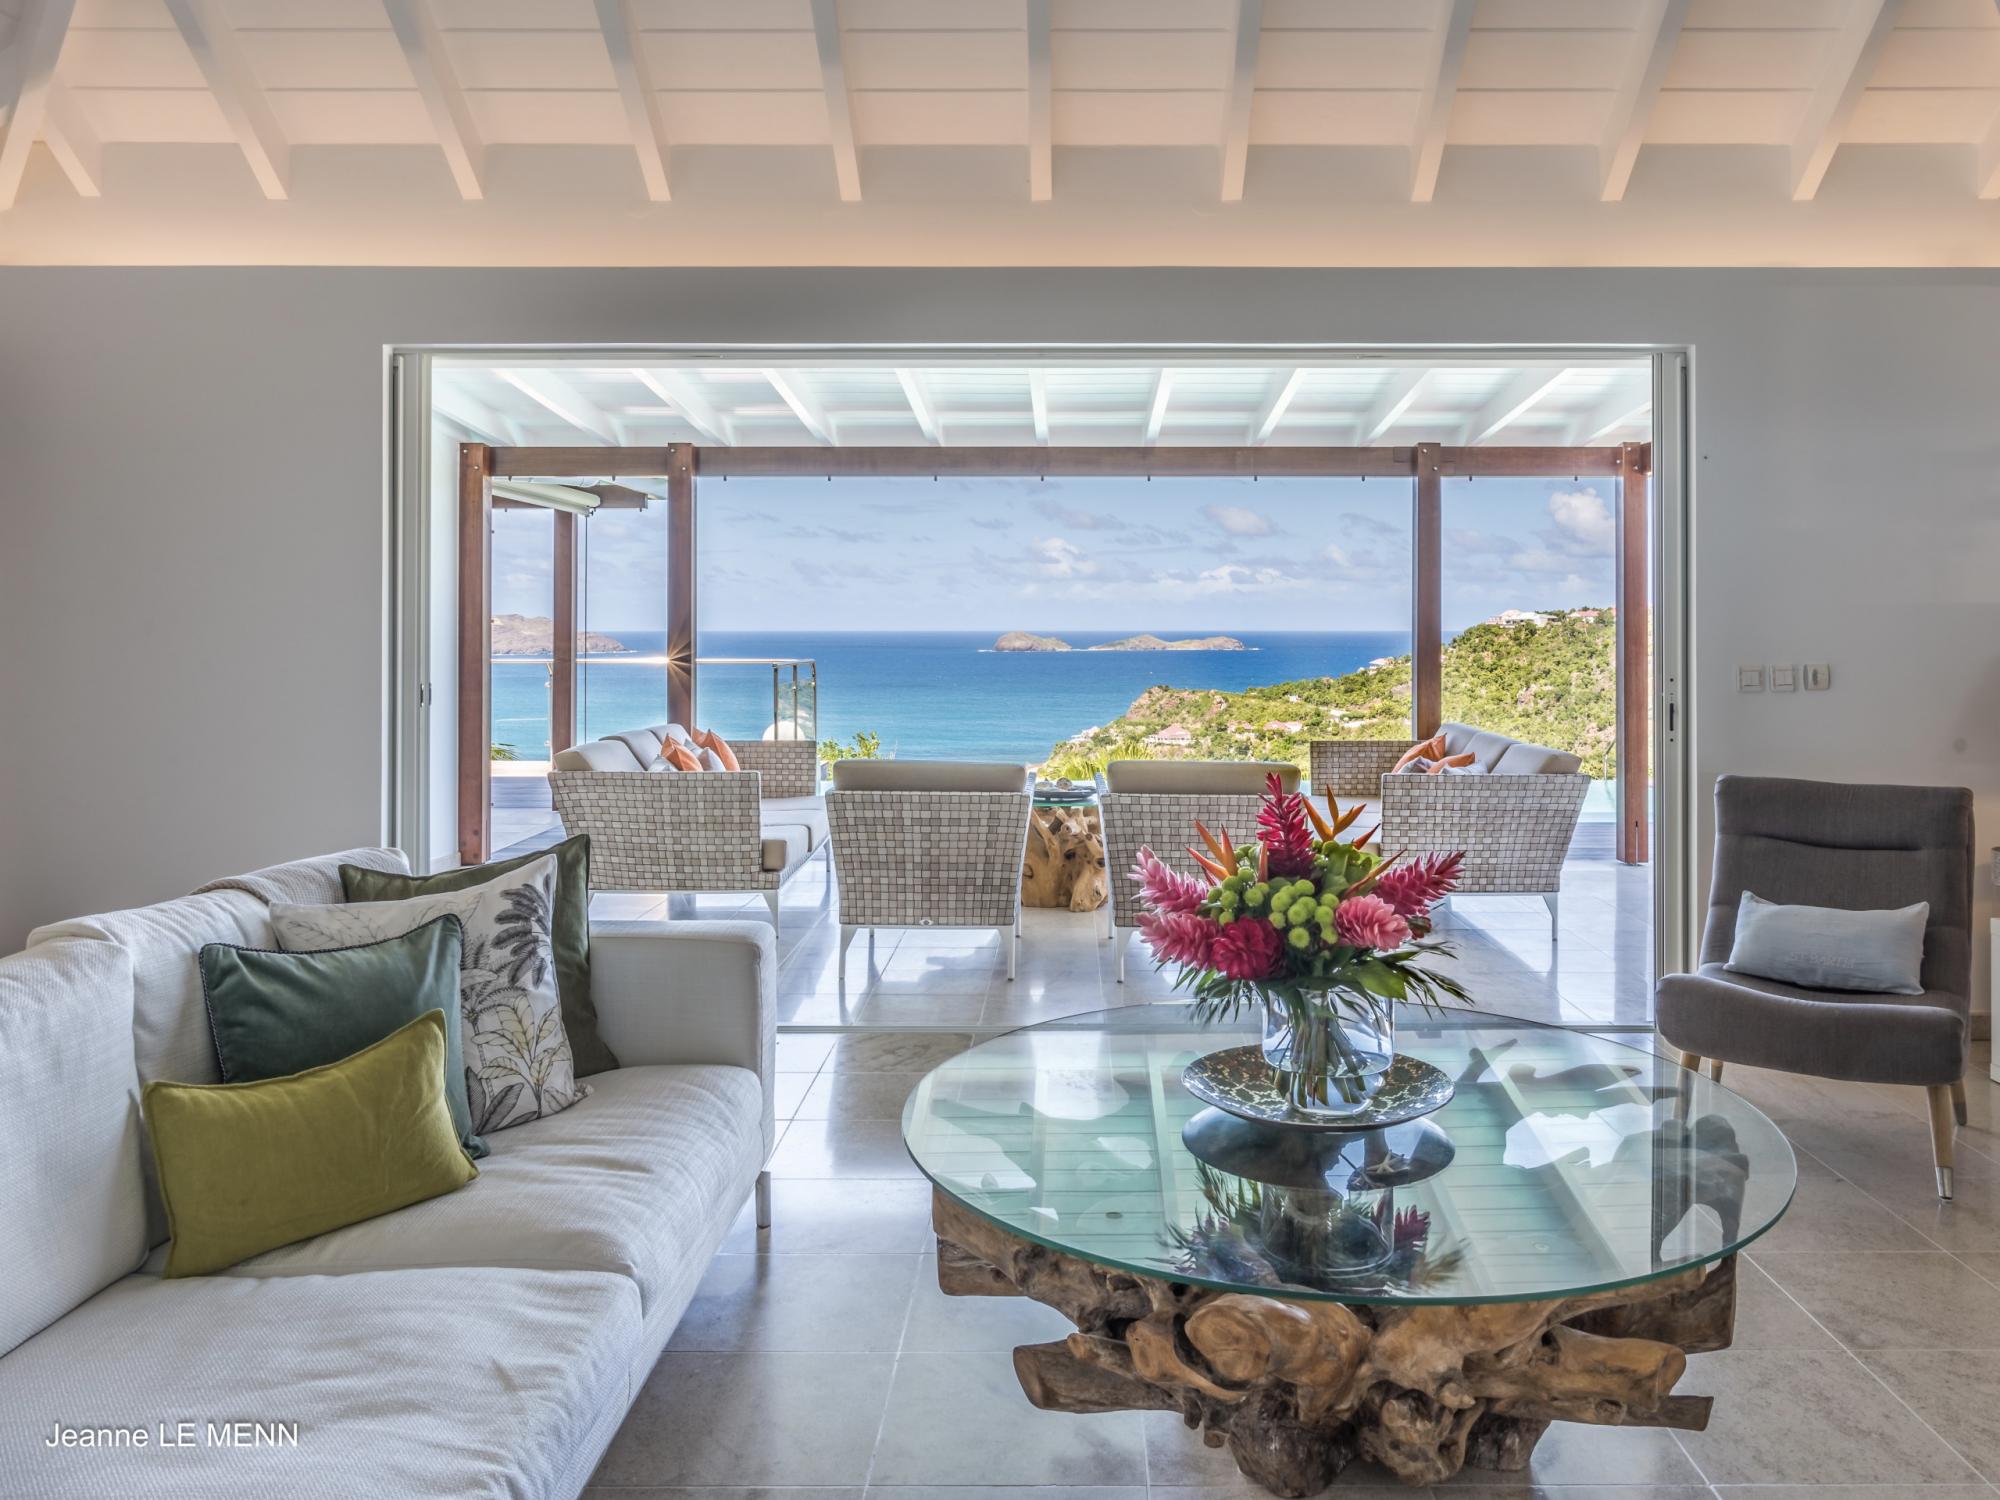 Isia Is A Very Popular Villa In St Barths On The Heights Of St Jean - Saint-Barthélemy